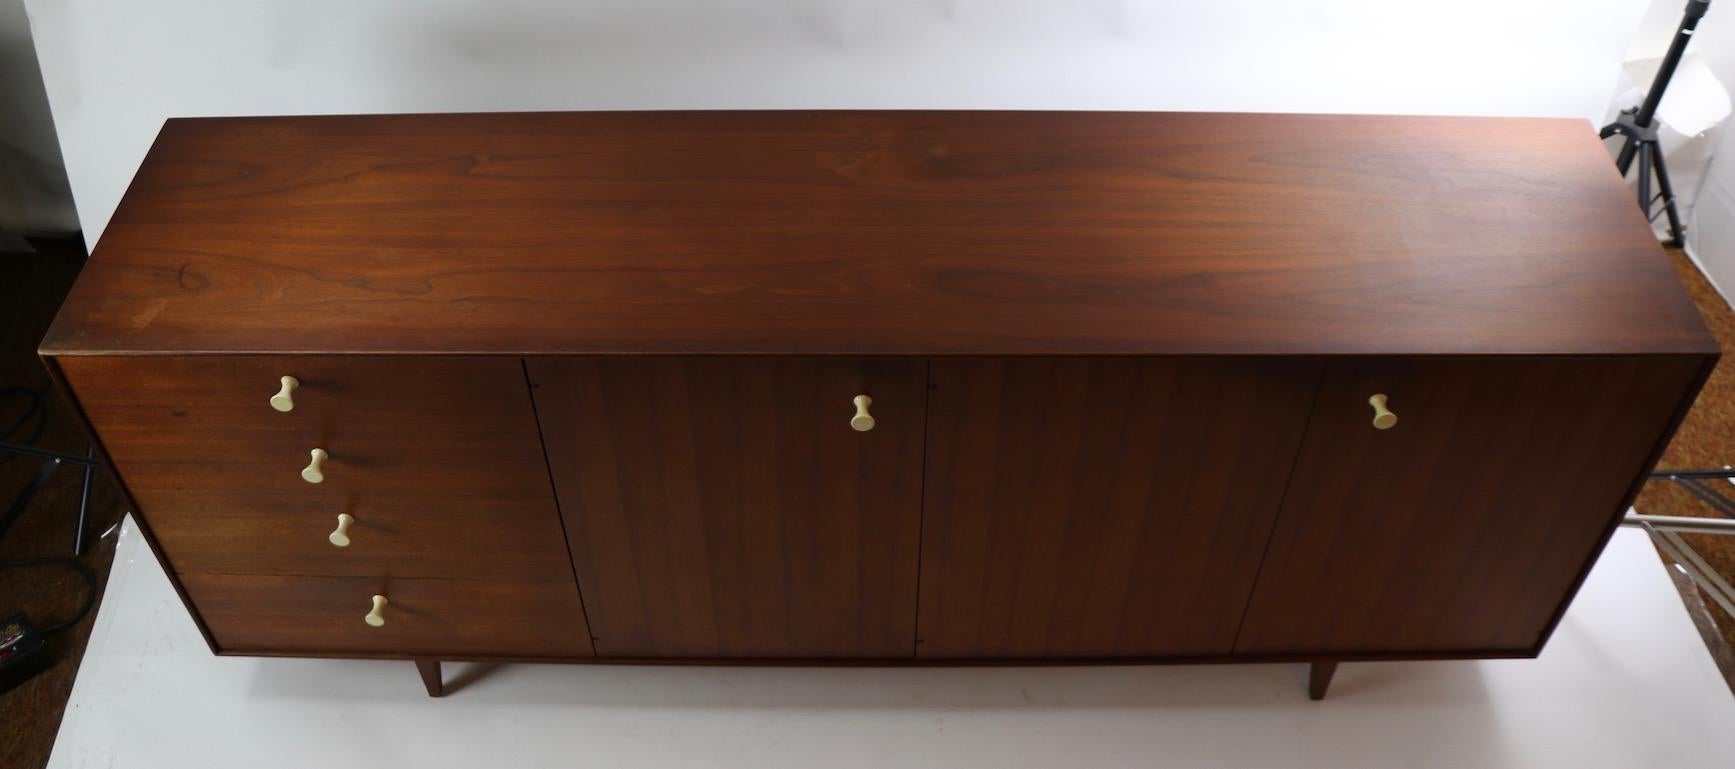 Metal George Nelson Thin Edge Credenza Sideboard for Herman Miller For Sale